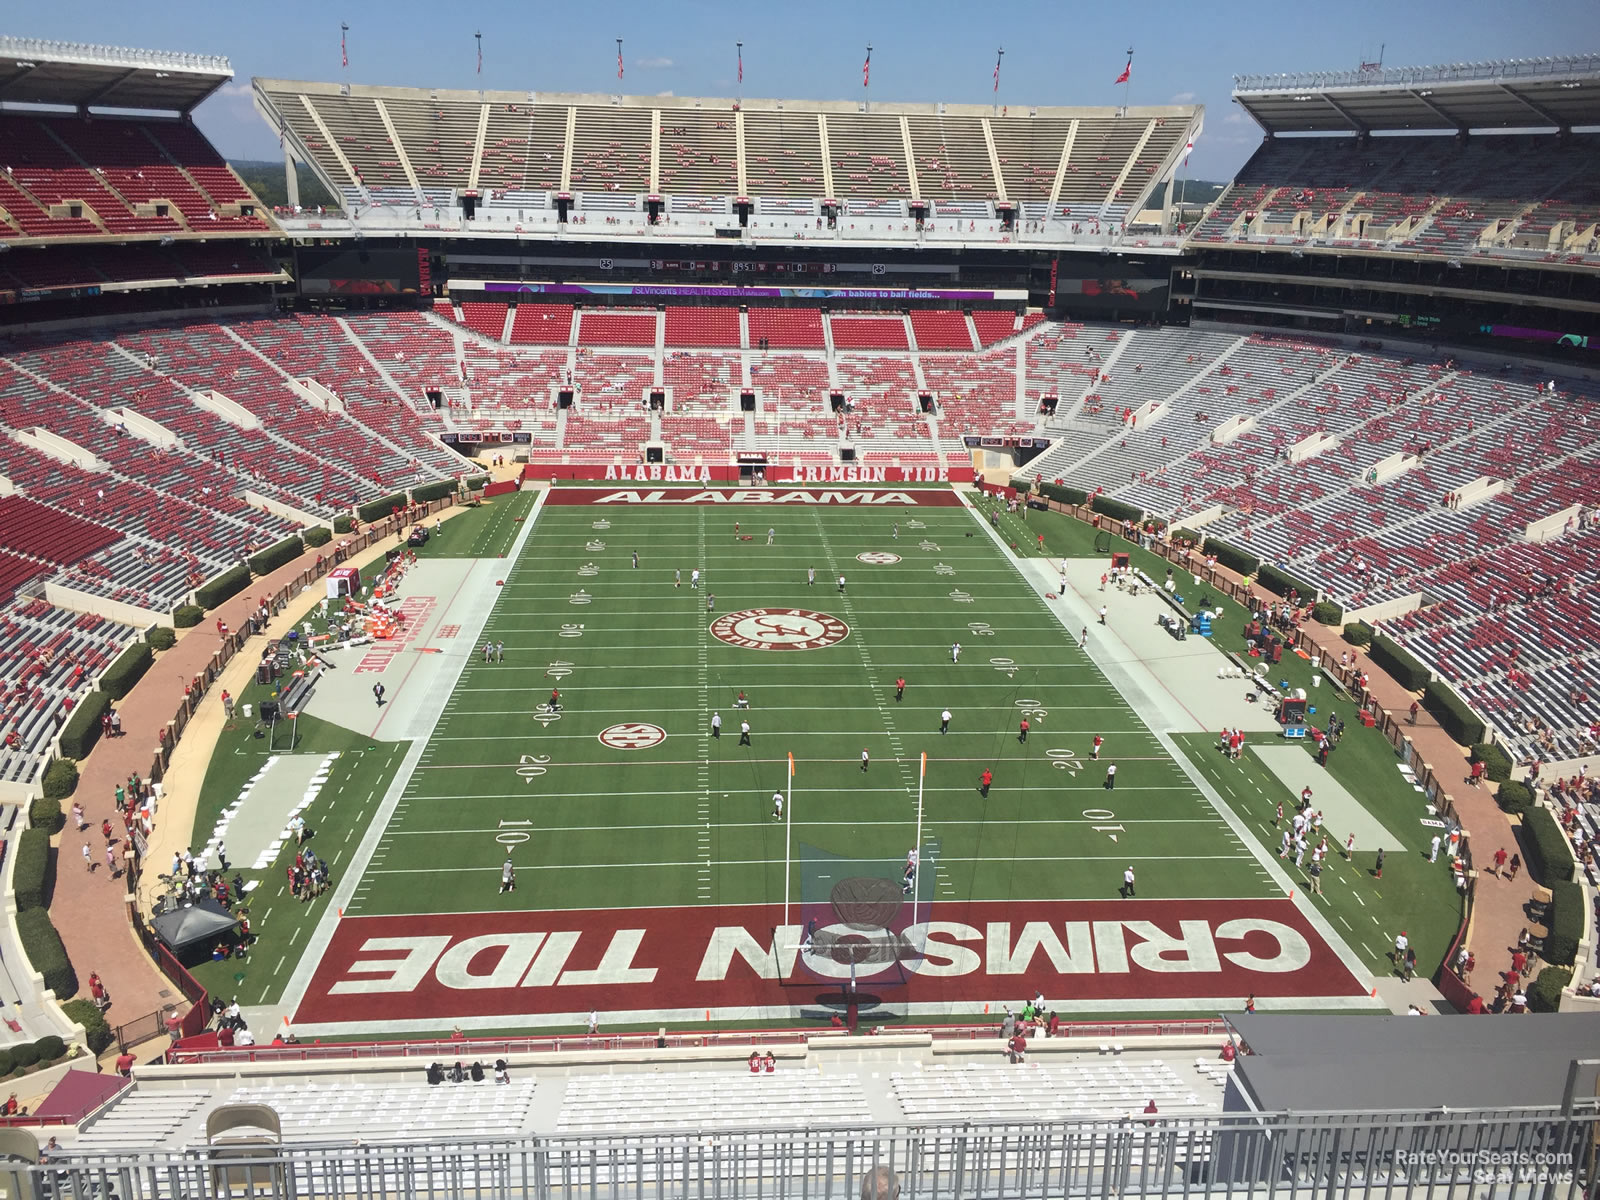 Bryant Denny Interactive Seating Chart